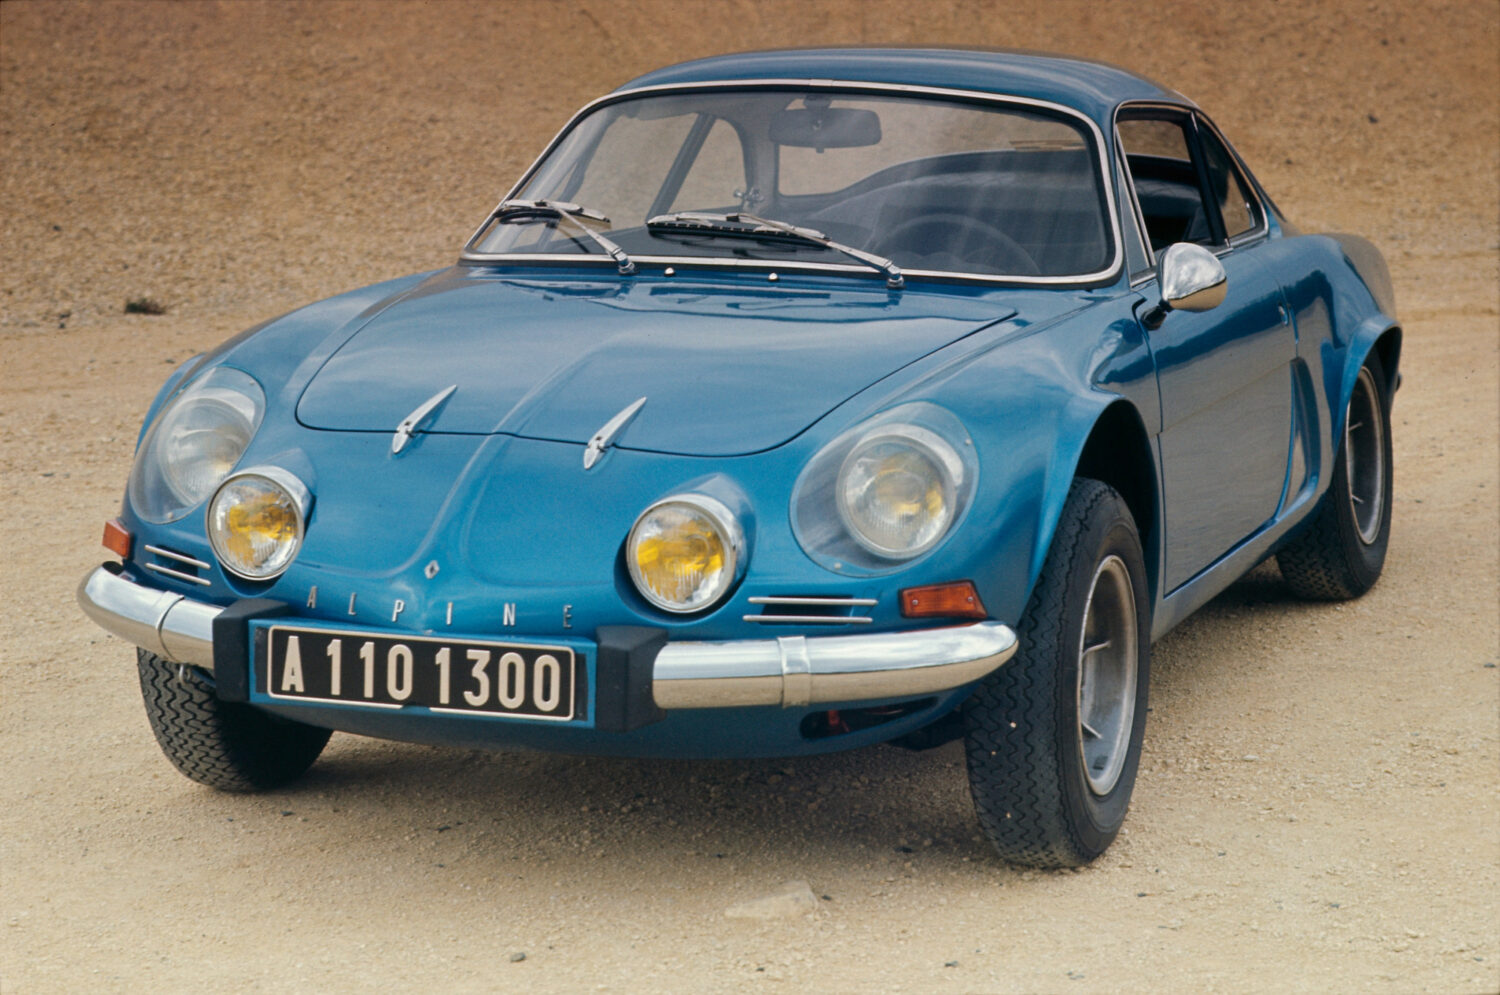 2021 - Story Alpine - 50 shades of blue: an iconic colour in motion